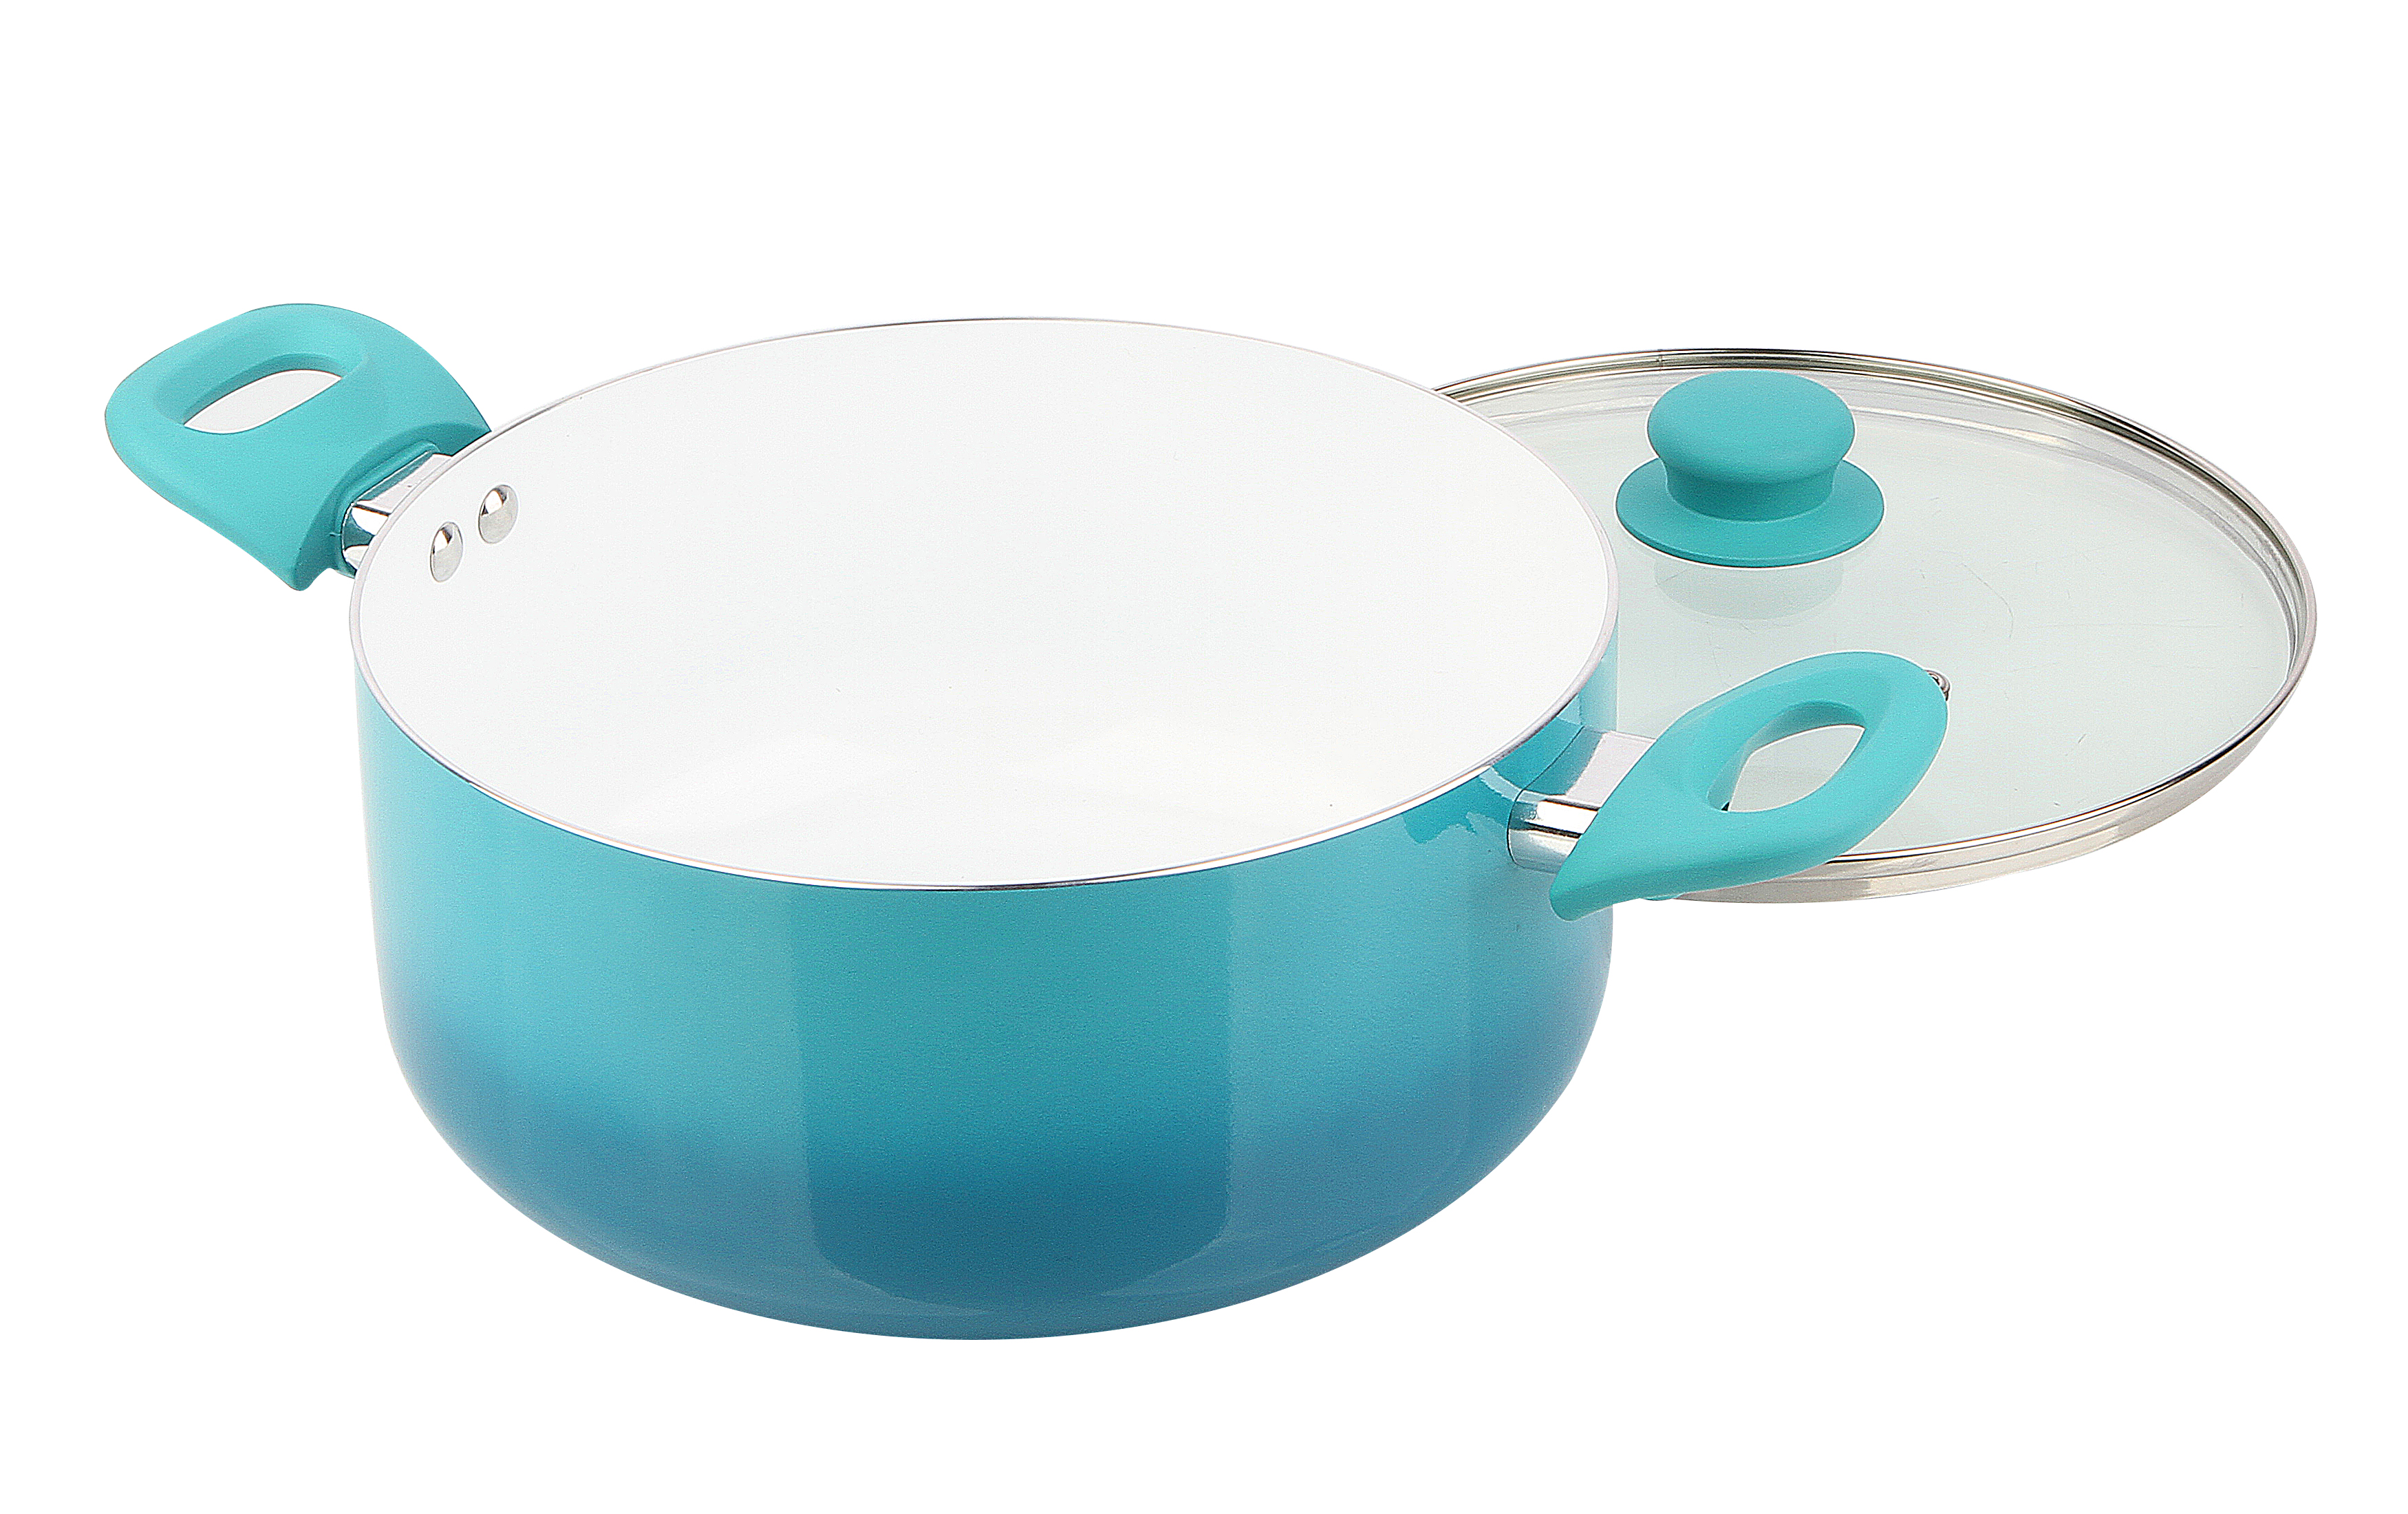 Mainstays Ceramic Nonstick 12 Piece Cookware Set, Teal Ombre - image 5 of 8